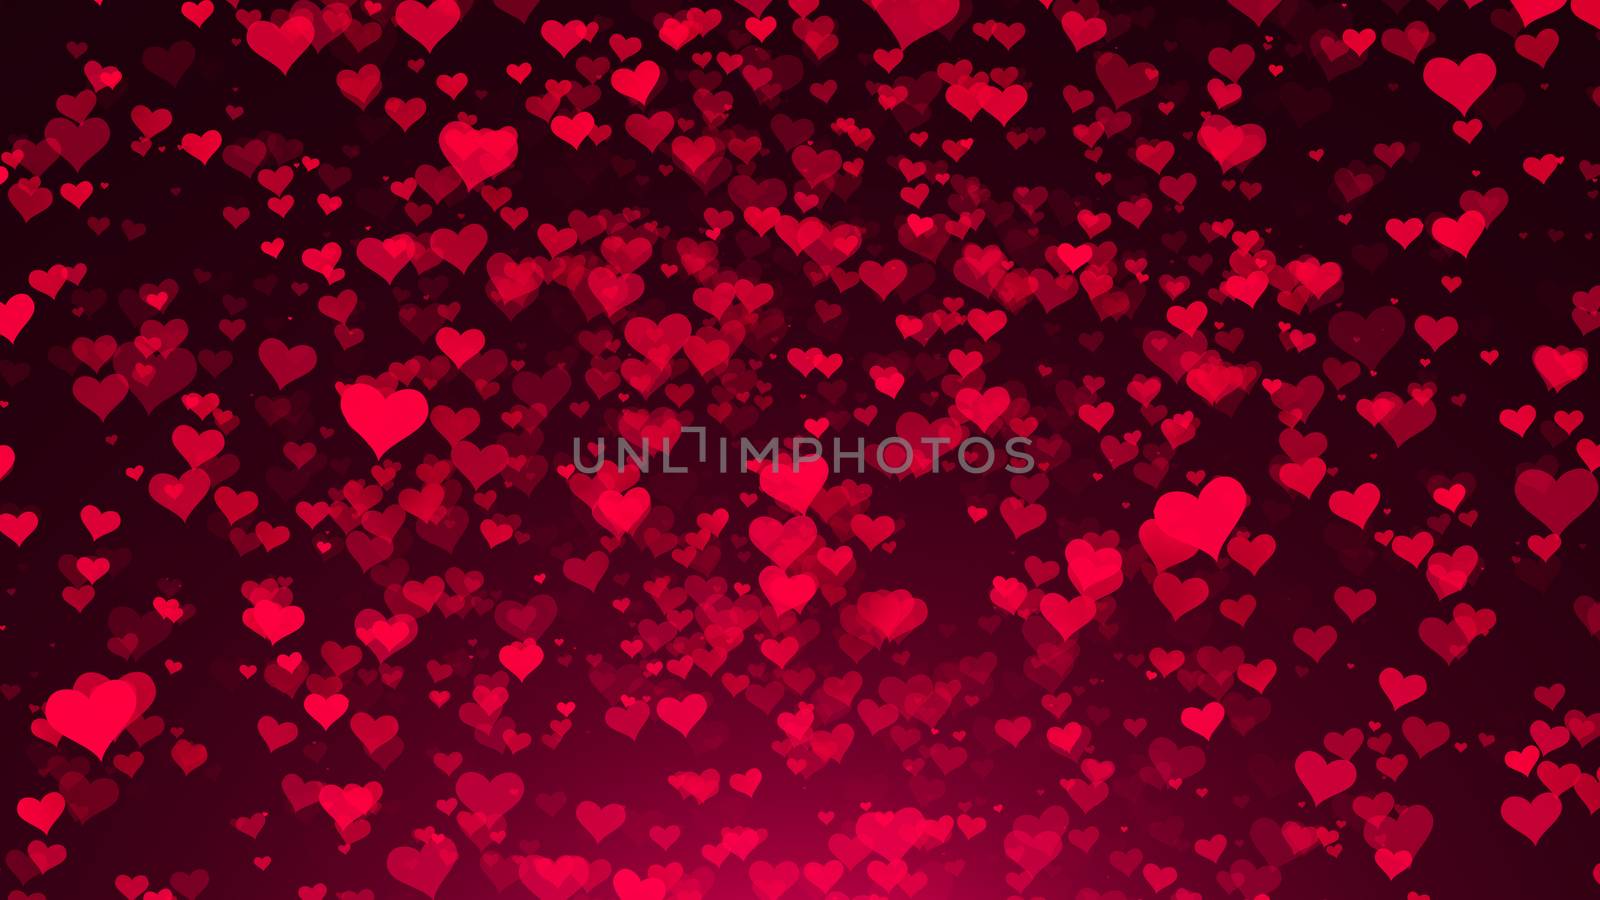 Abstract background with hearts. Digital illustration by nolimit046